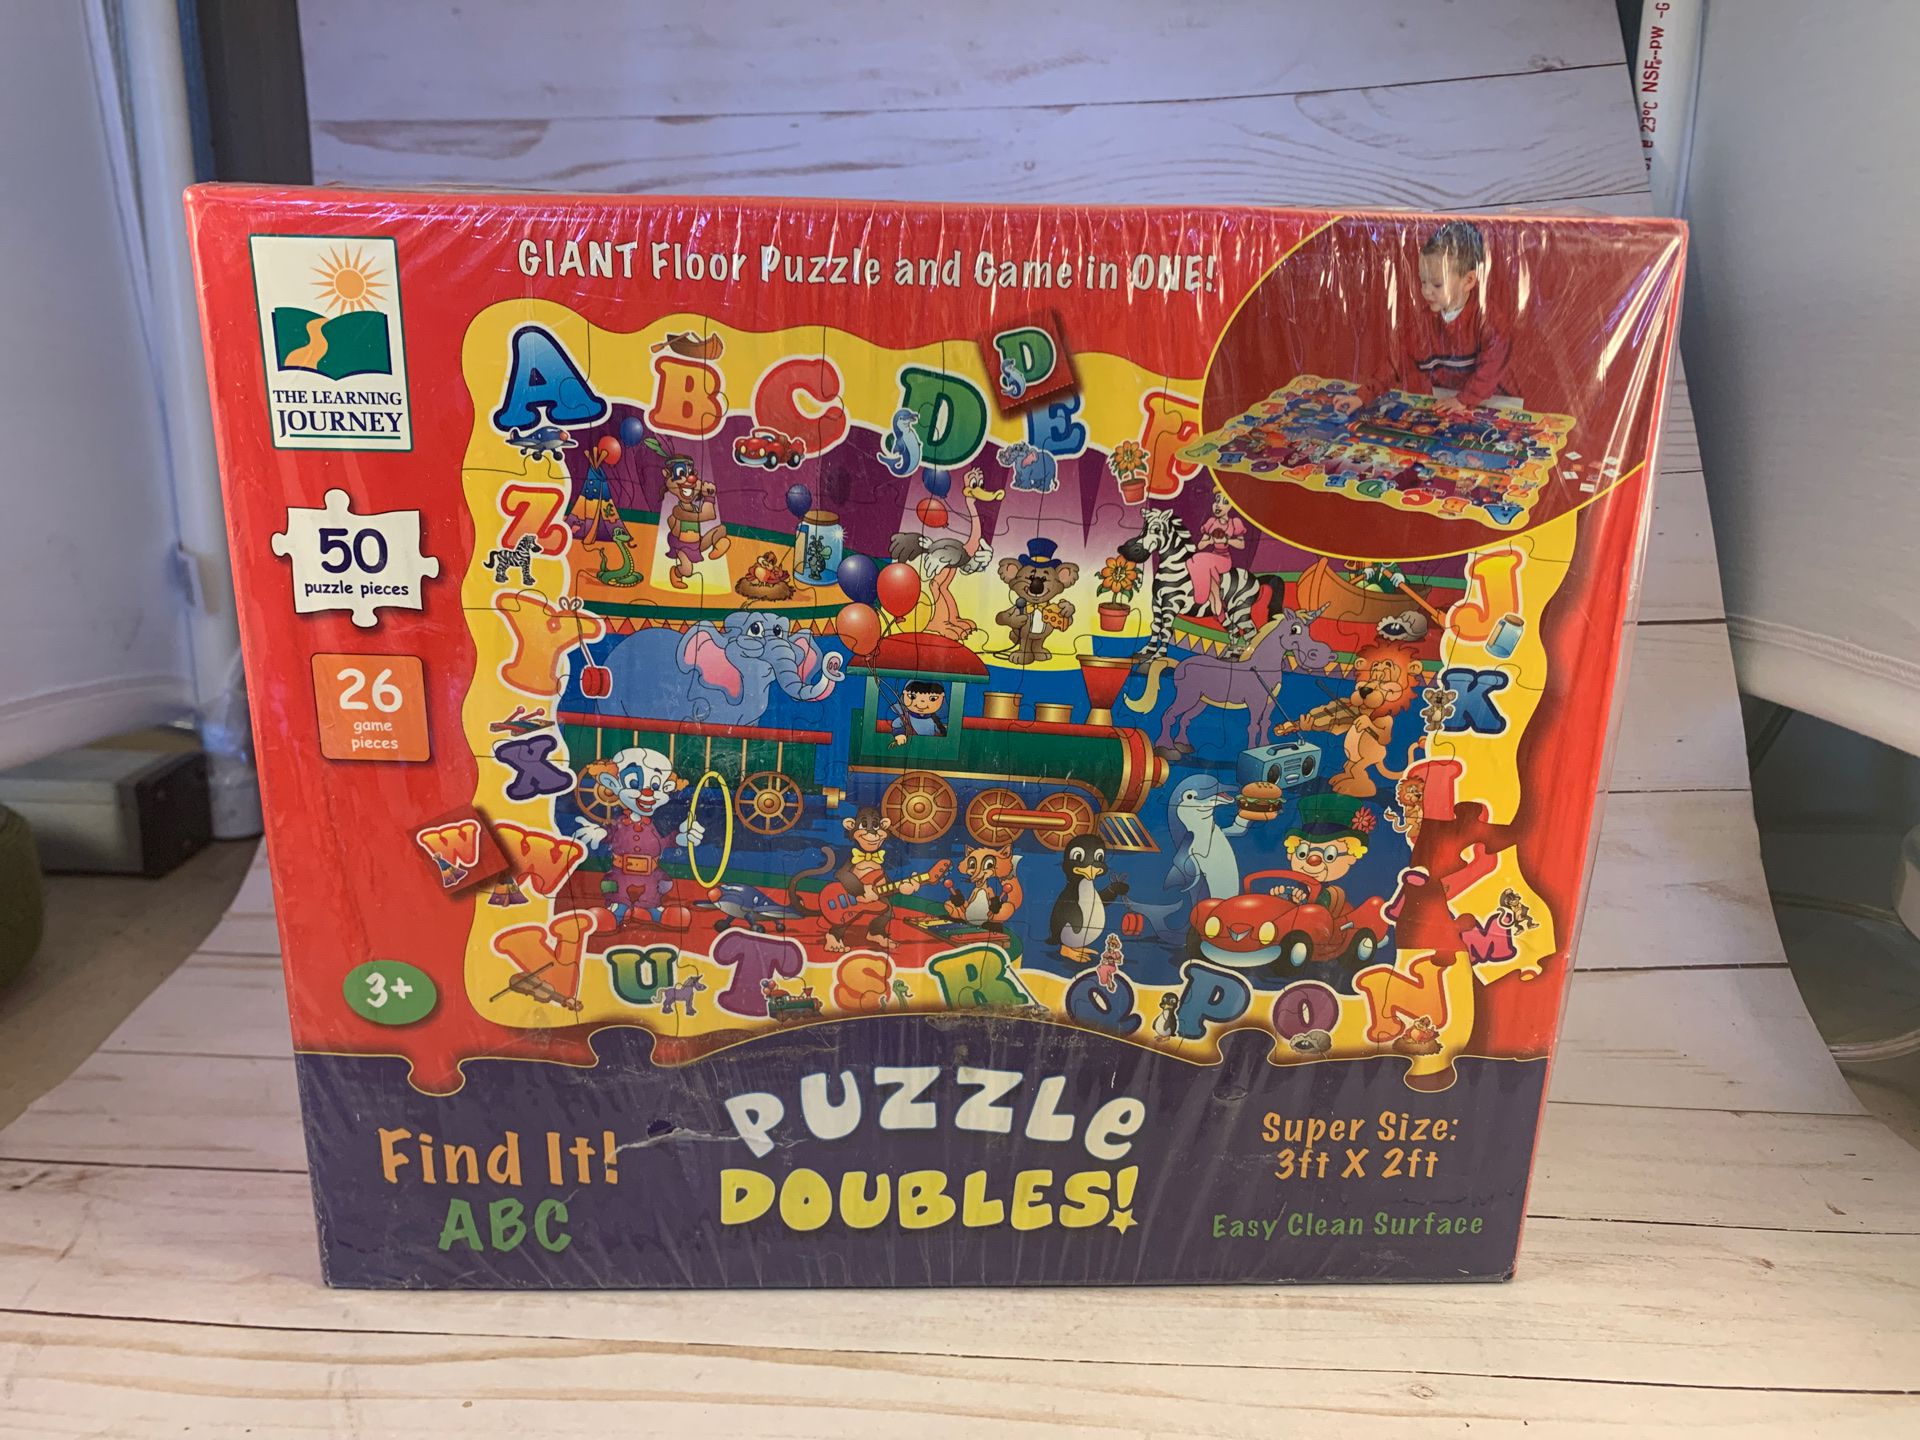 FIND IT! ABC Giant Floor Puzzle And Game In One - 3ftx2ft